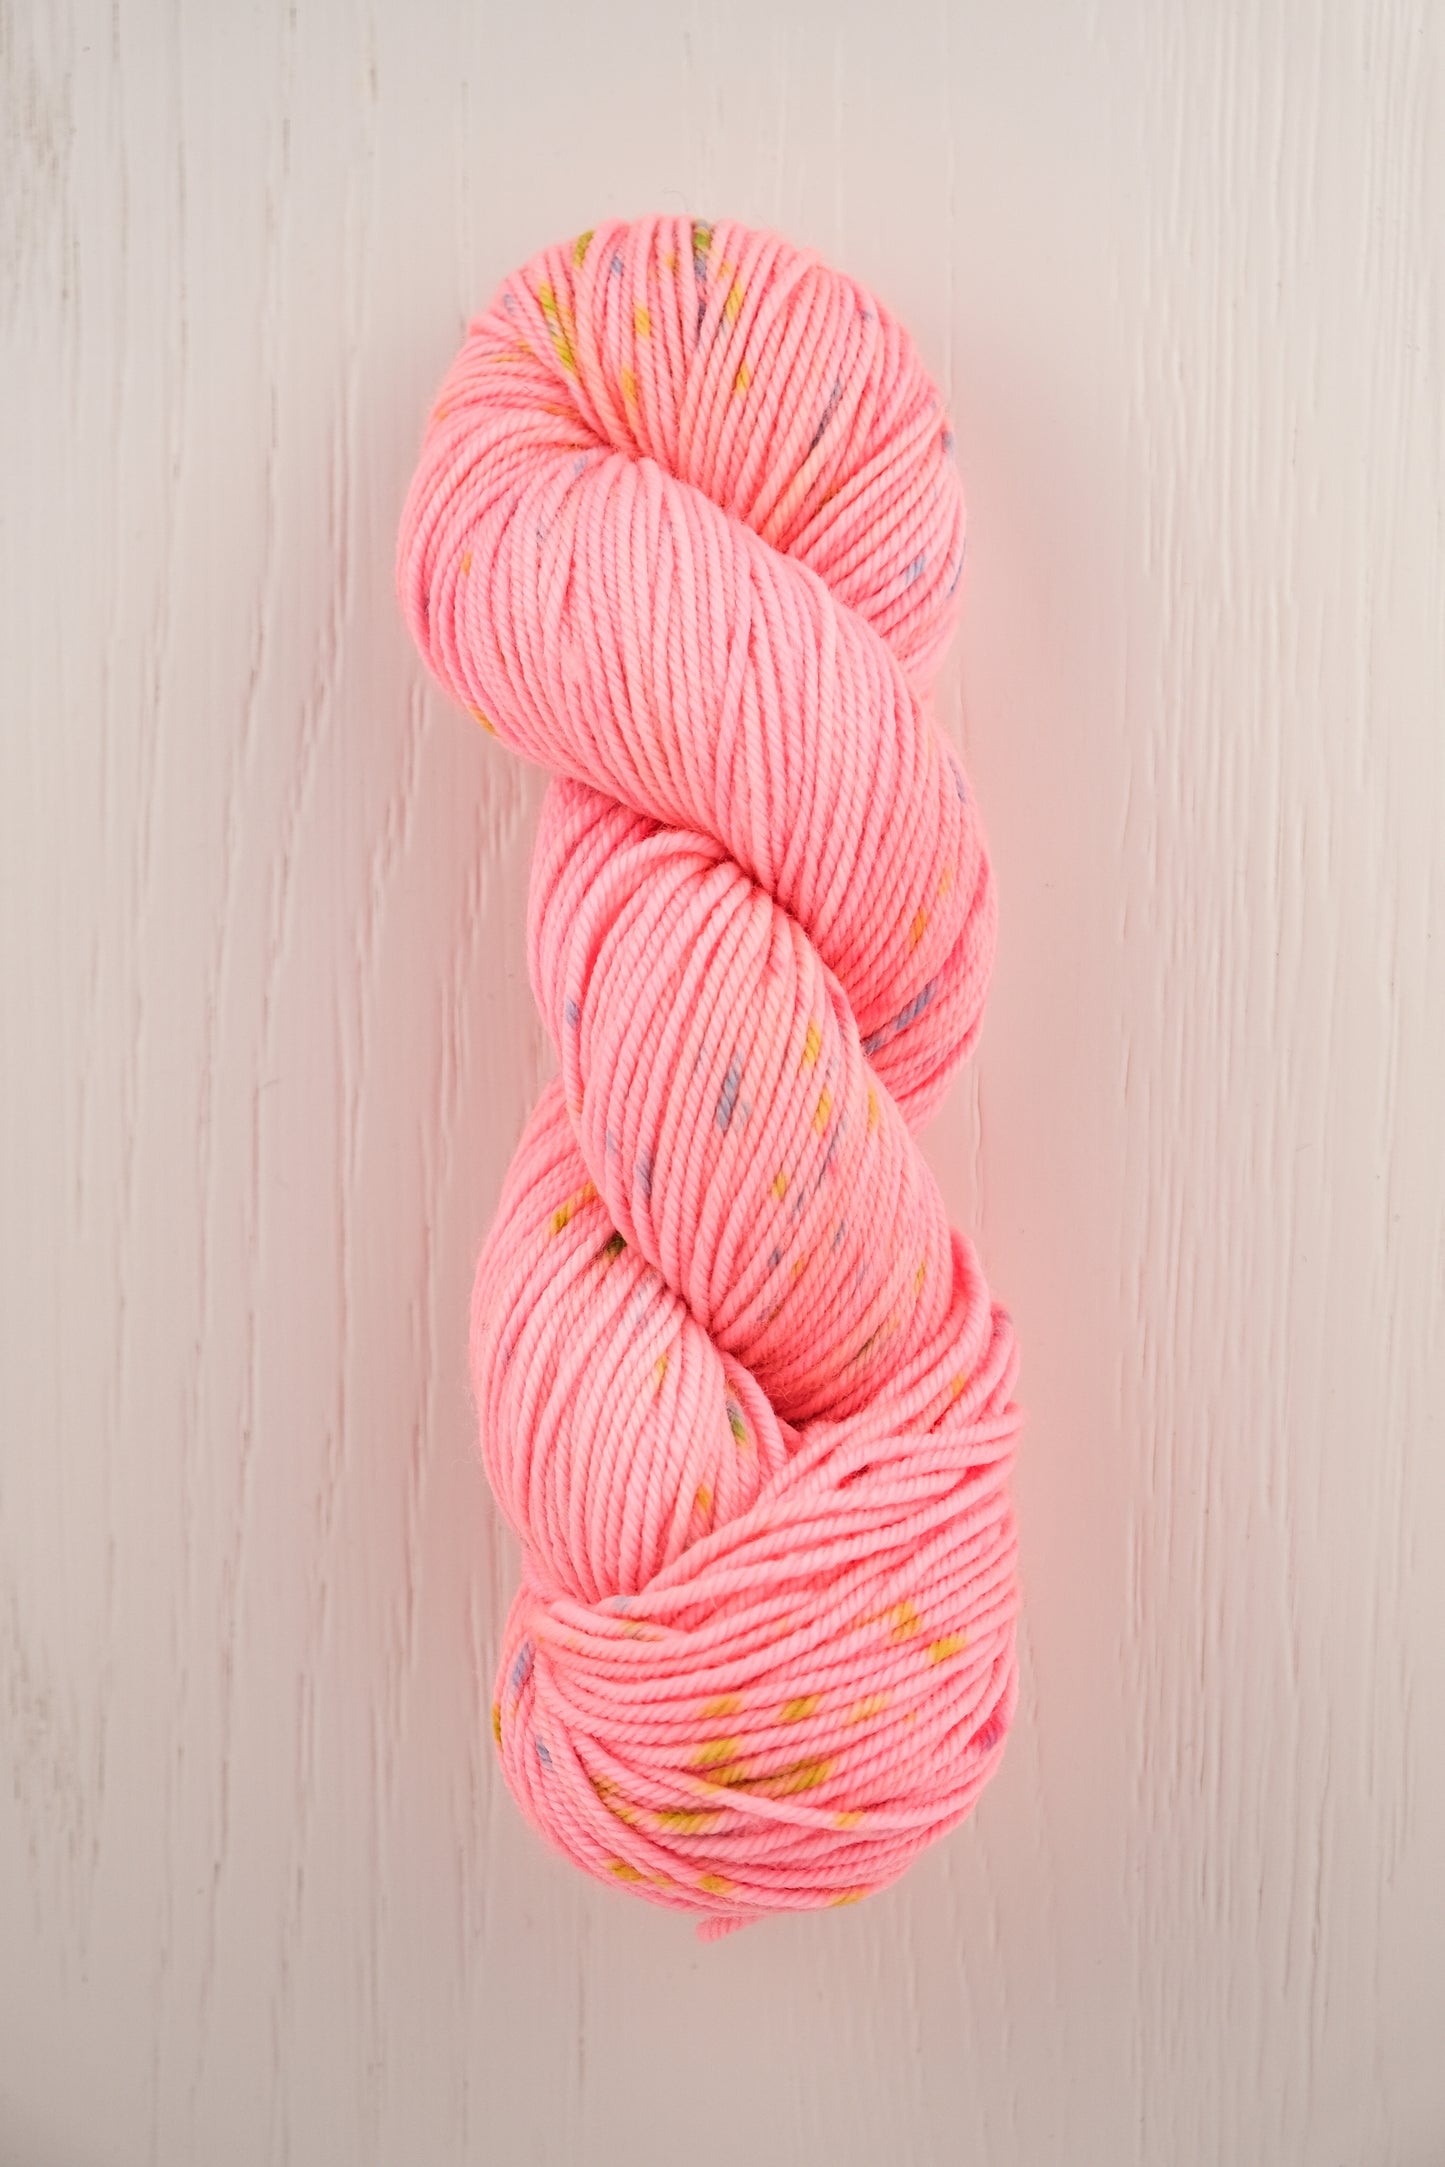 Pink Cadillac - Aspen Worsted